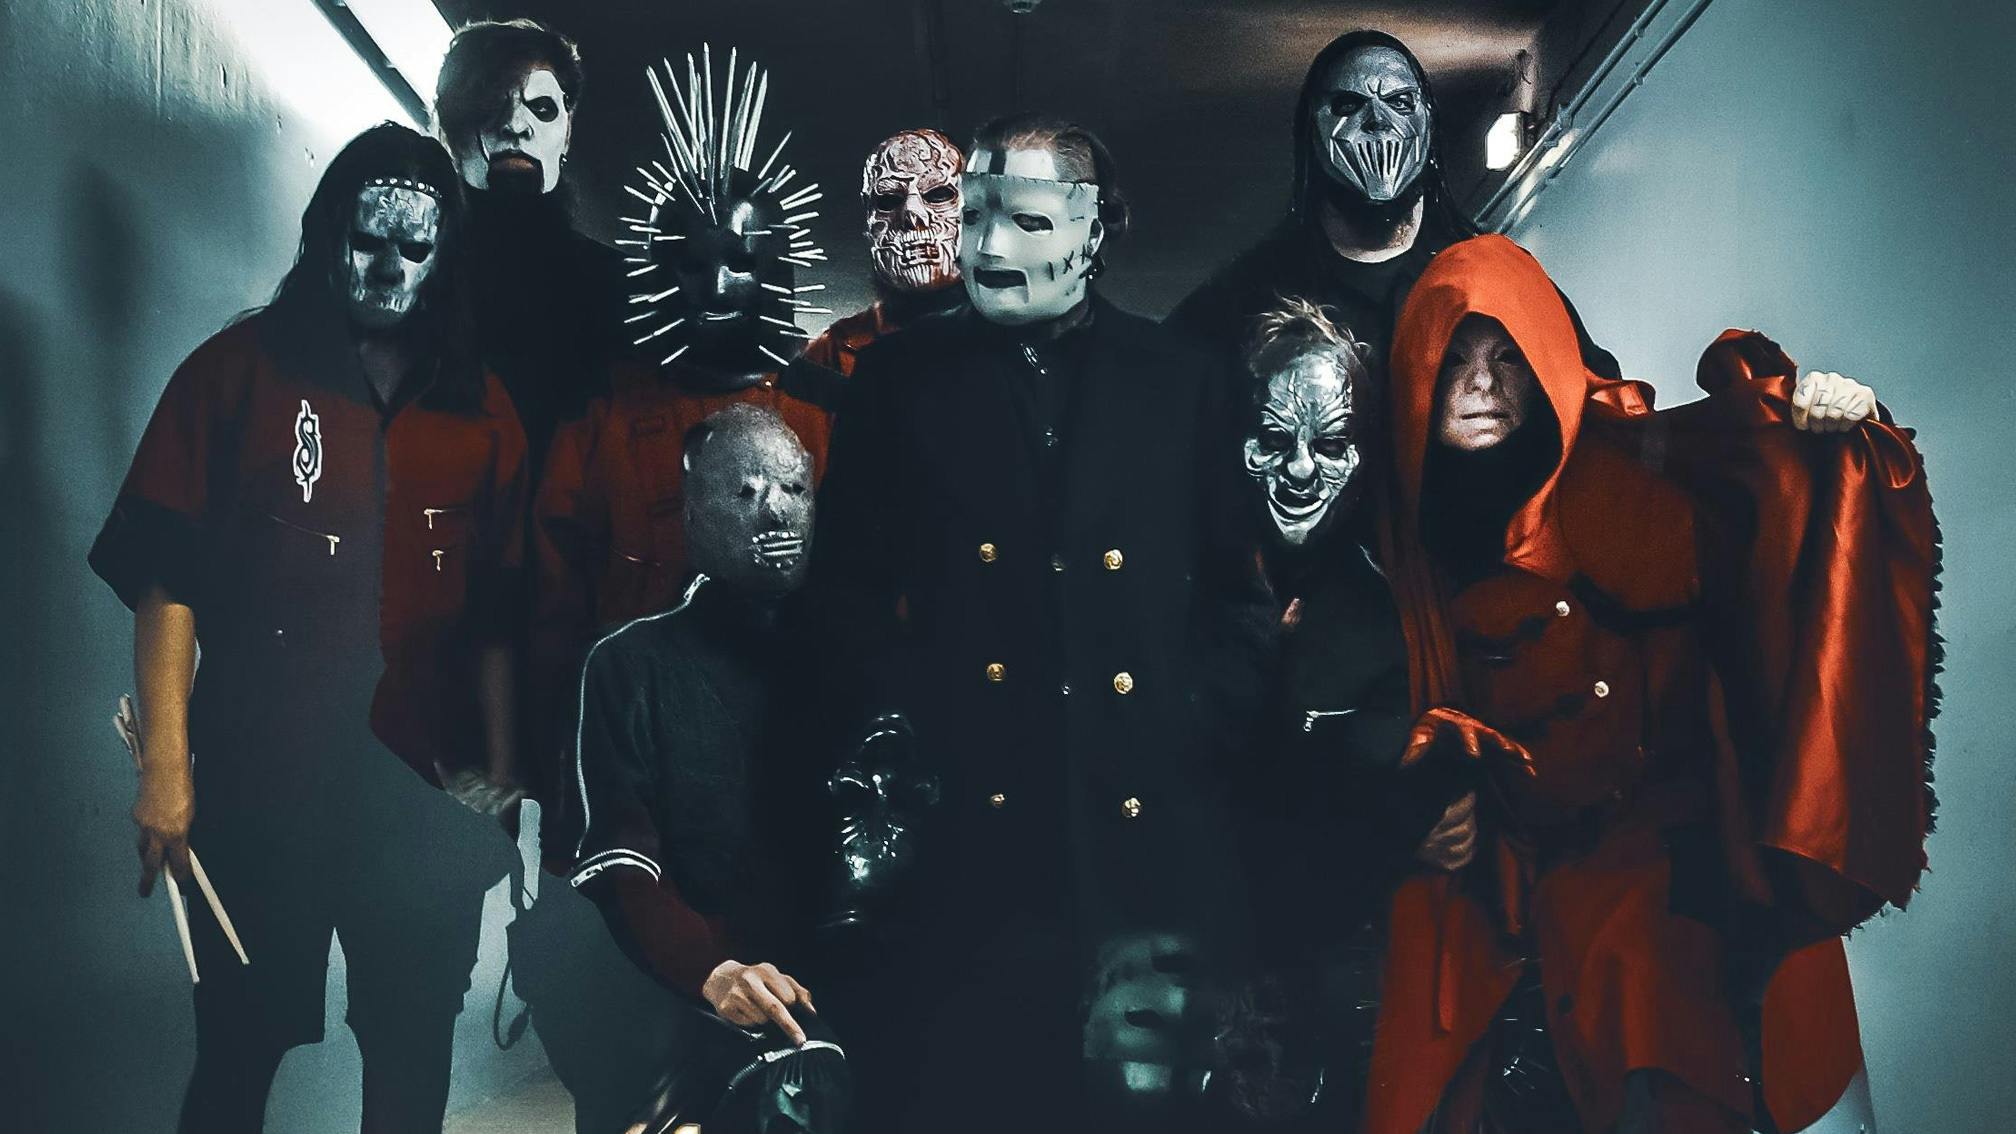 Slipknot to livestream their biggest headline performance ever at Knotfest Los Angeles